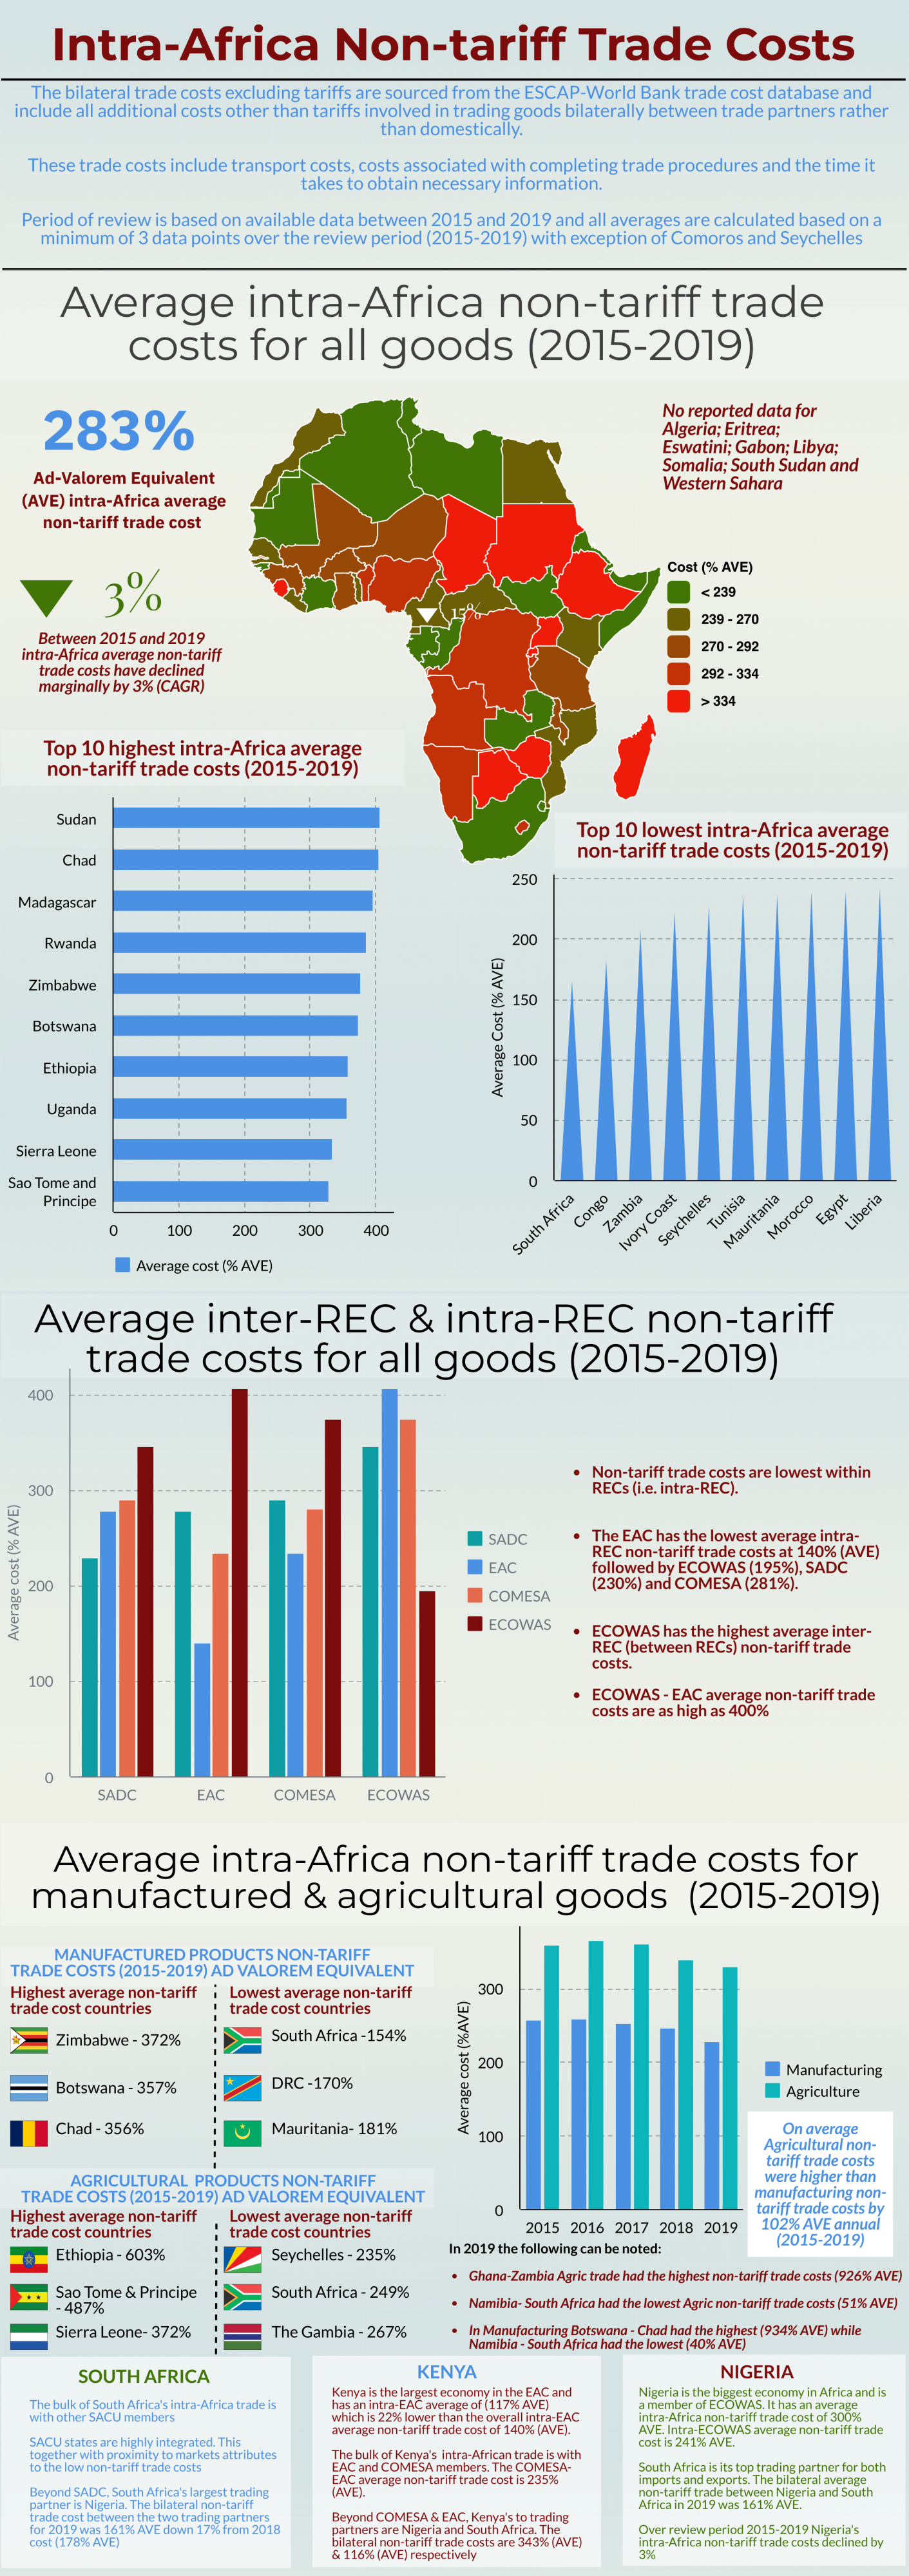 Intra-Africa Non-tariff Trade Costs for the period 2015-2019